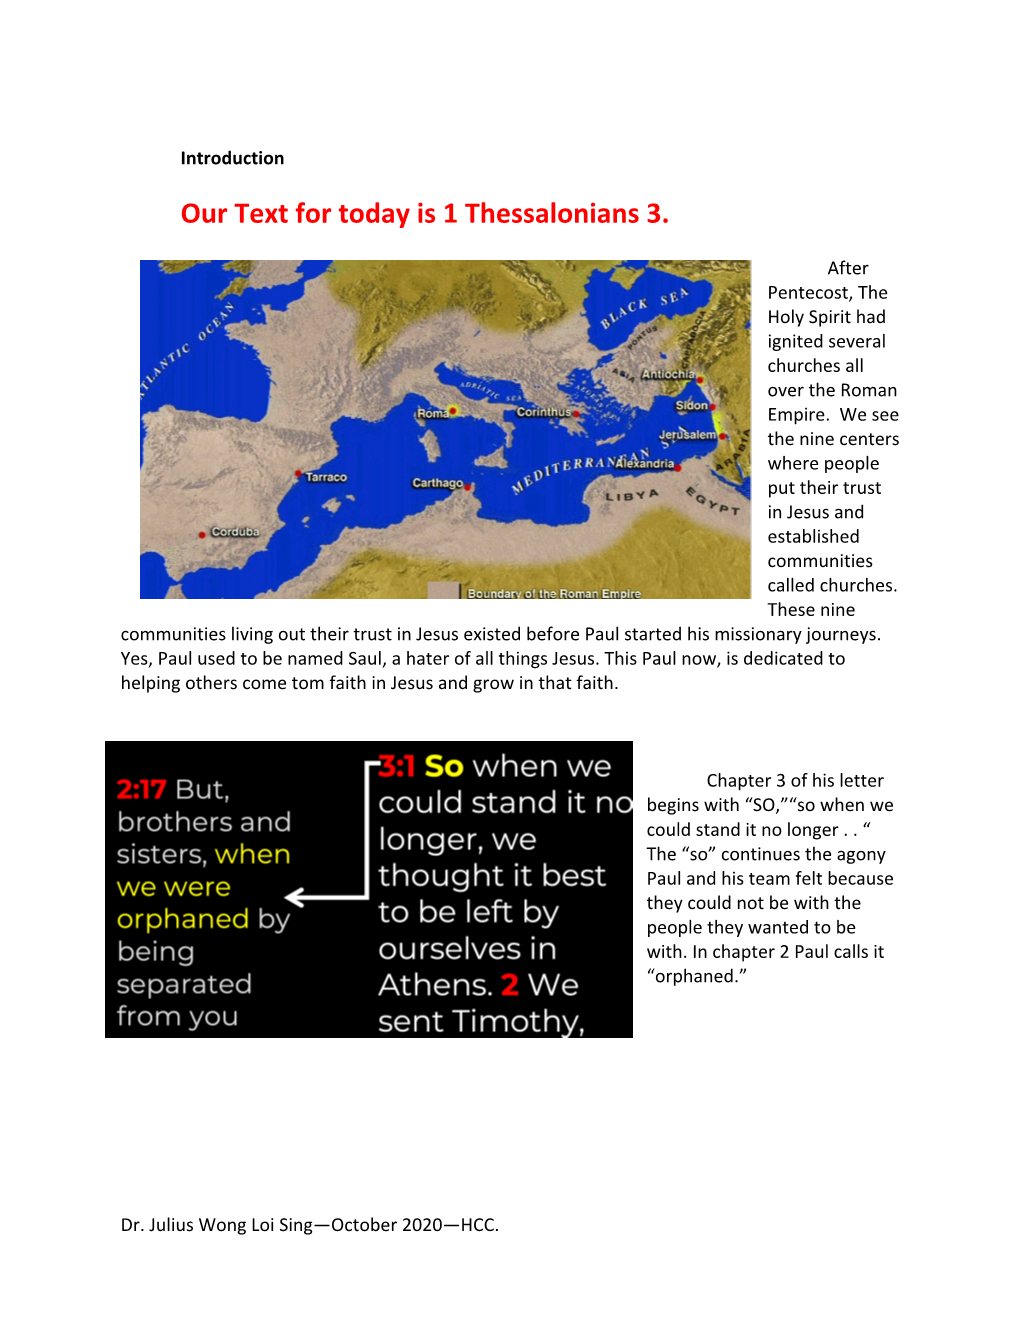 Our Text for Today Is 1 Thessalonians 3